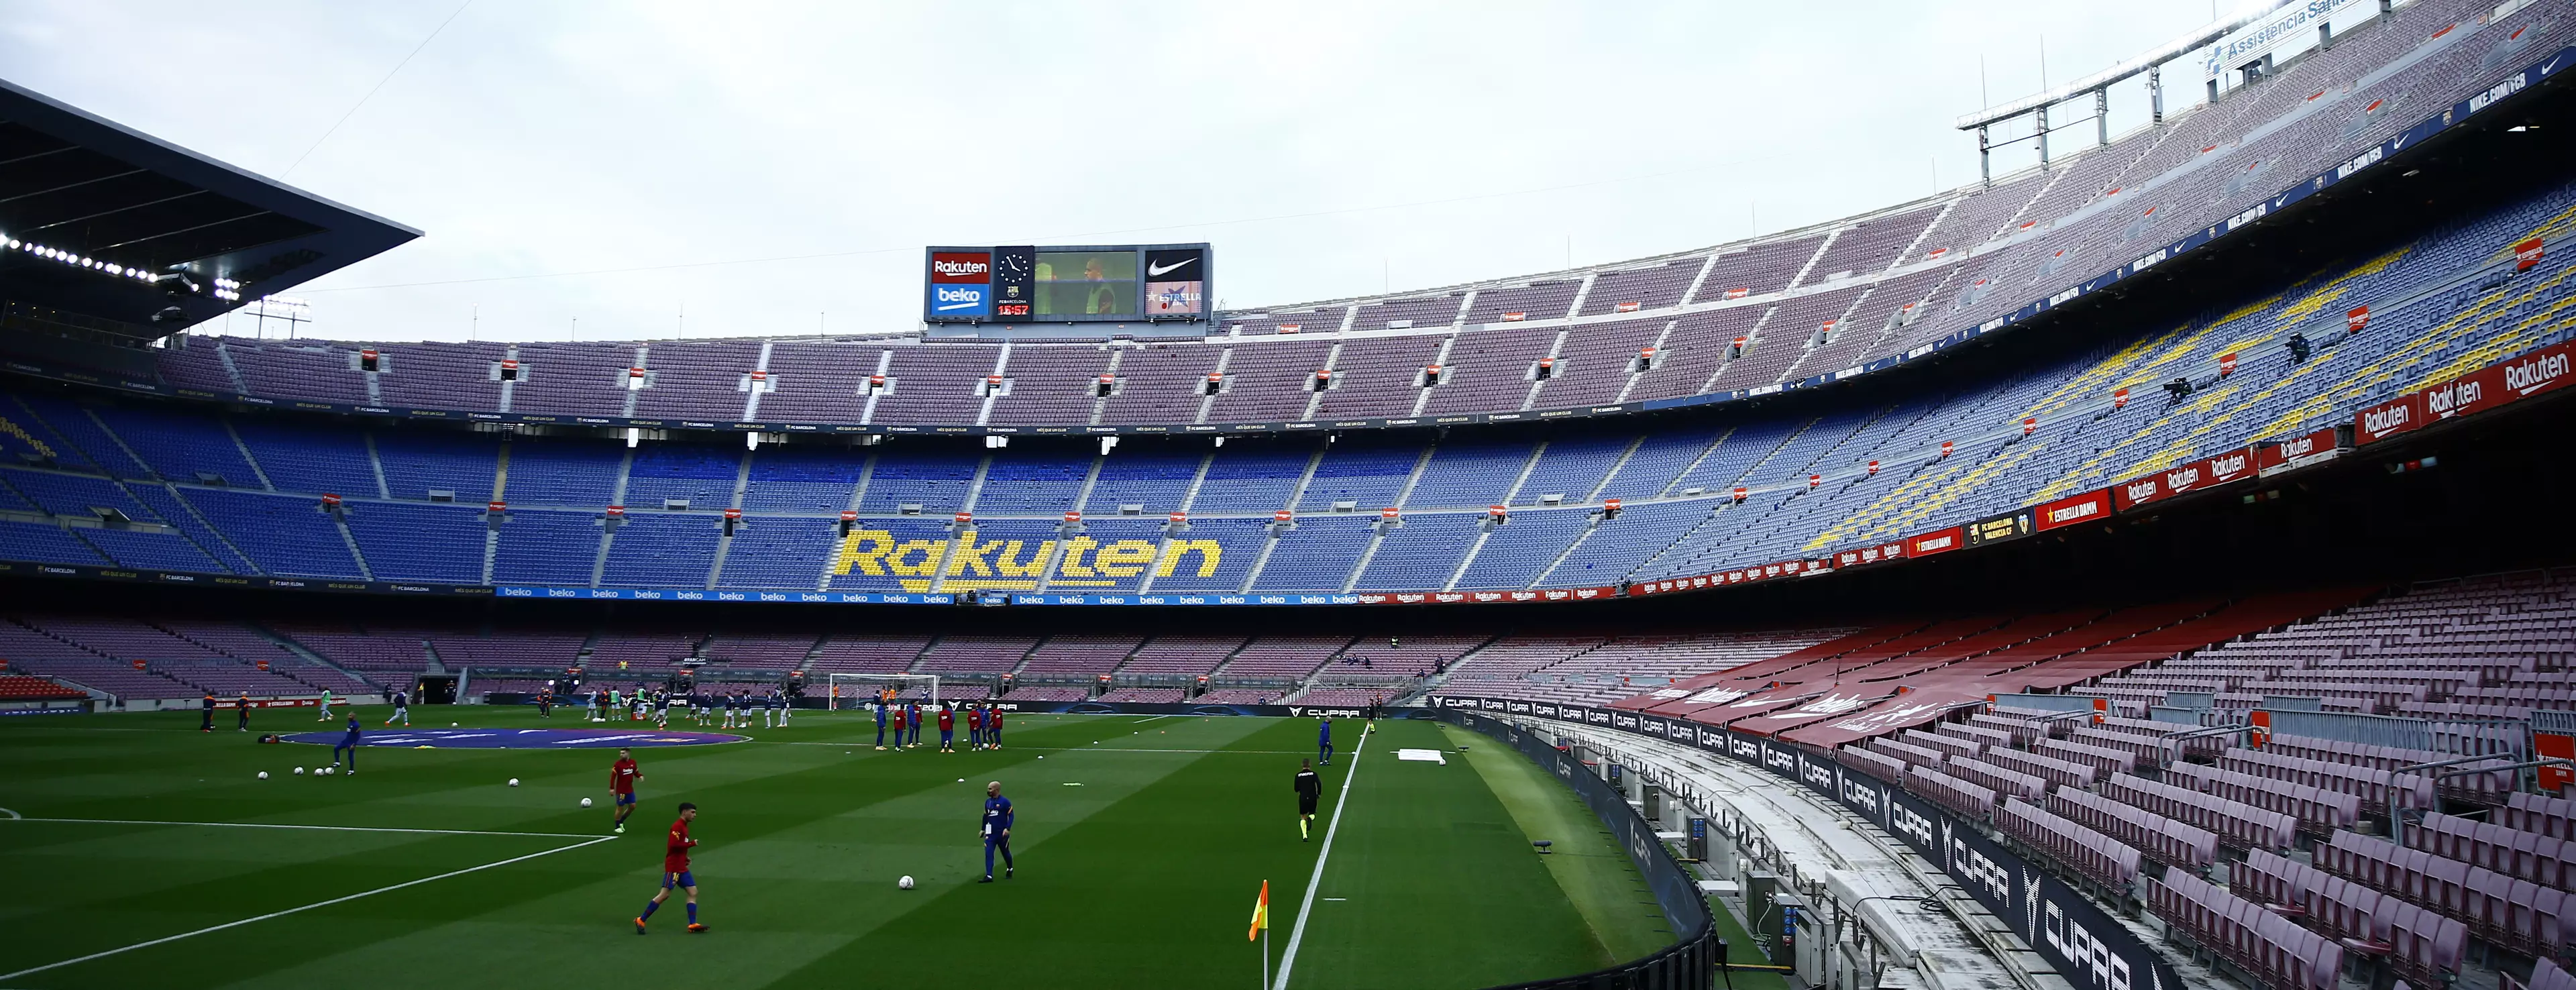 The Nou Camp could be torn down. Image: PA Images